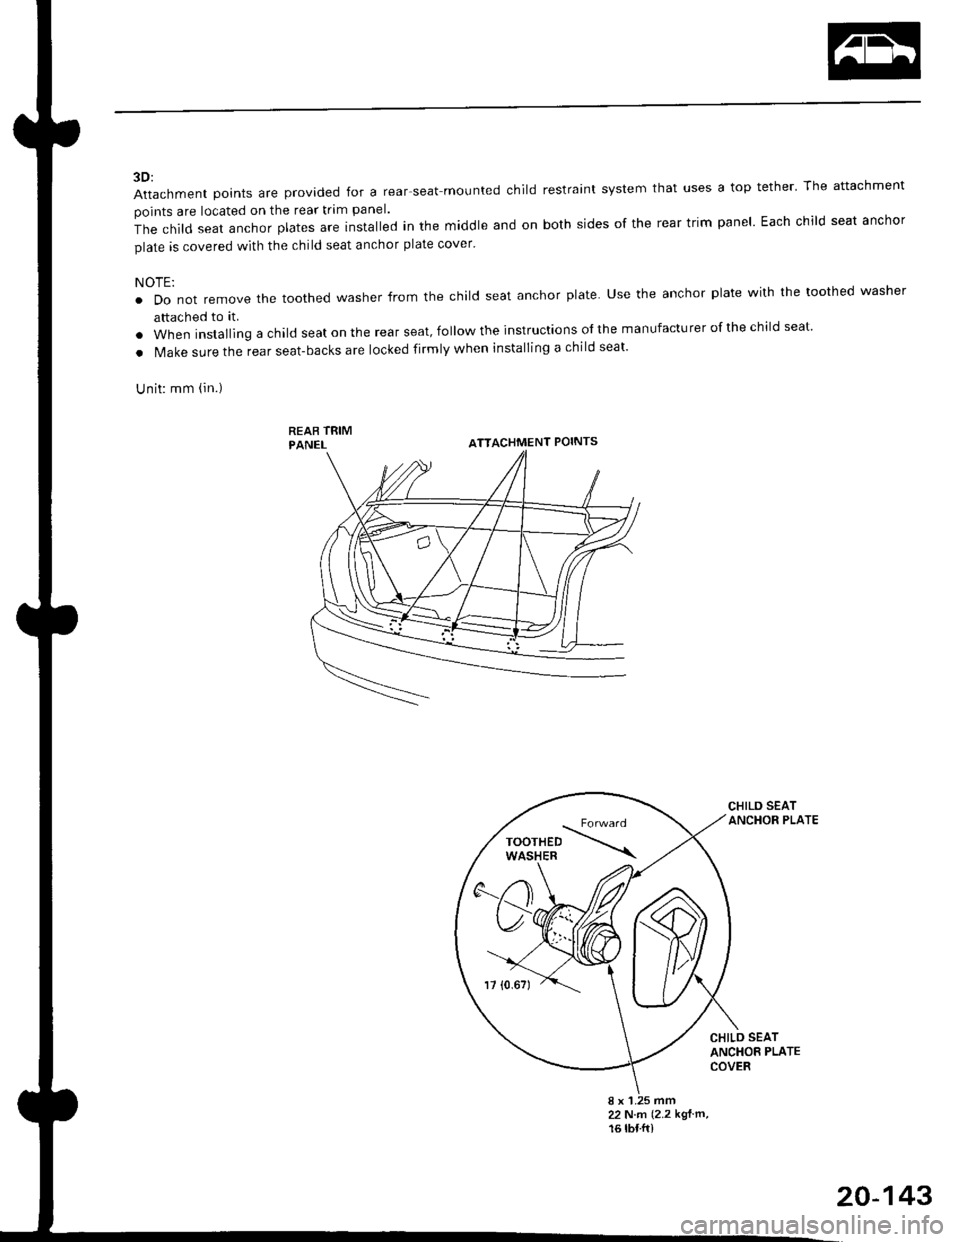 HONDA CIVIC 1996 6.G Workshop Manual 3D:
Attachment points are provided for a rear-seat mounted child restraint system that uses a top tether The attachment
points are located on the rear trim panel.
The child seat anchor plates are rns